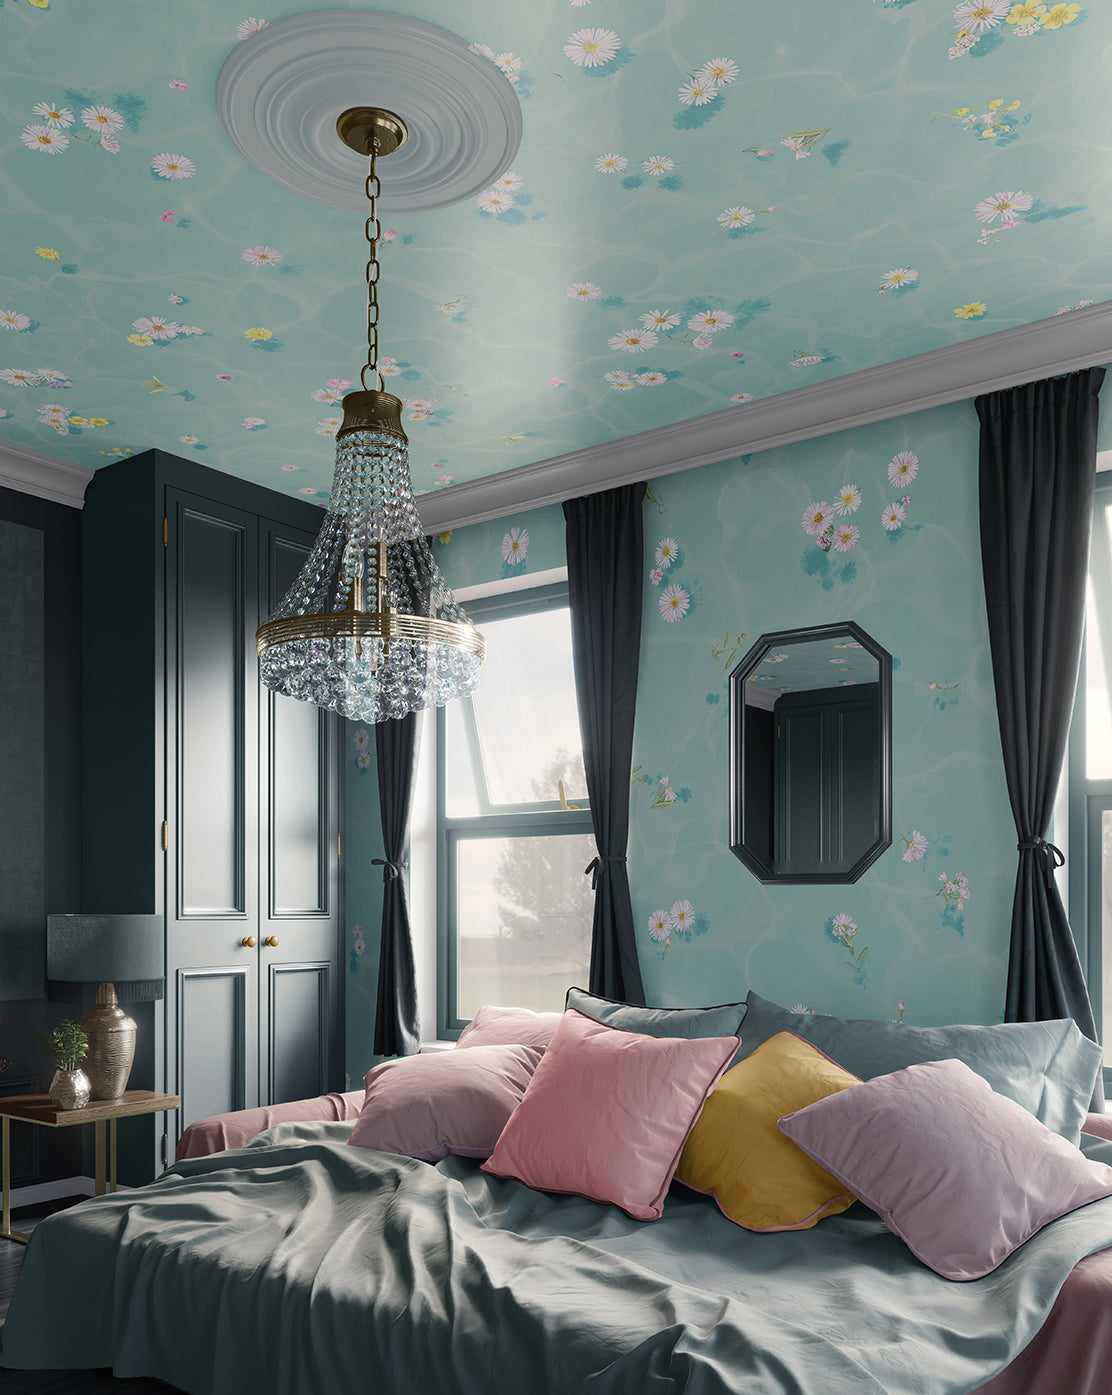 blue floral wallpaper on wall and ceiling